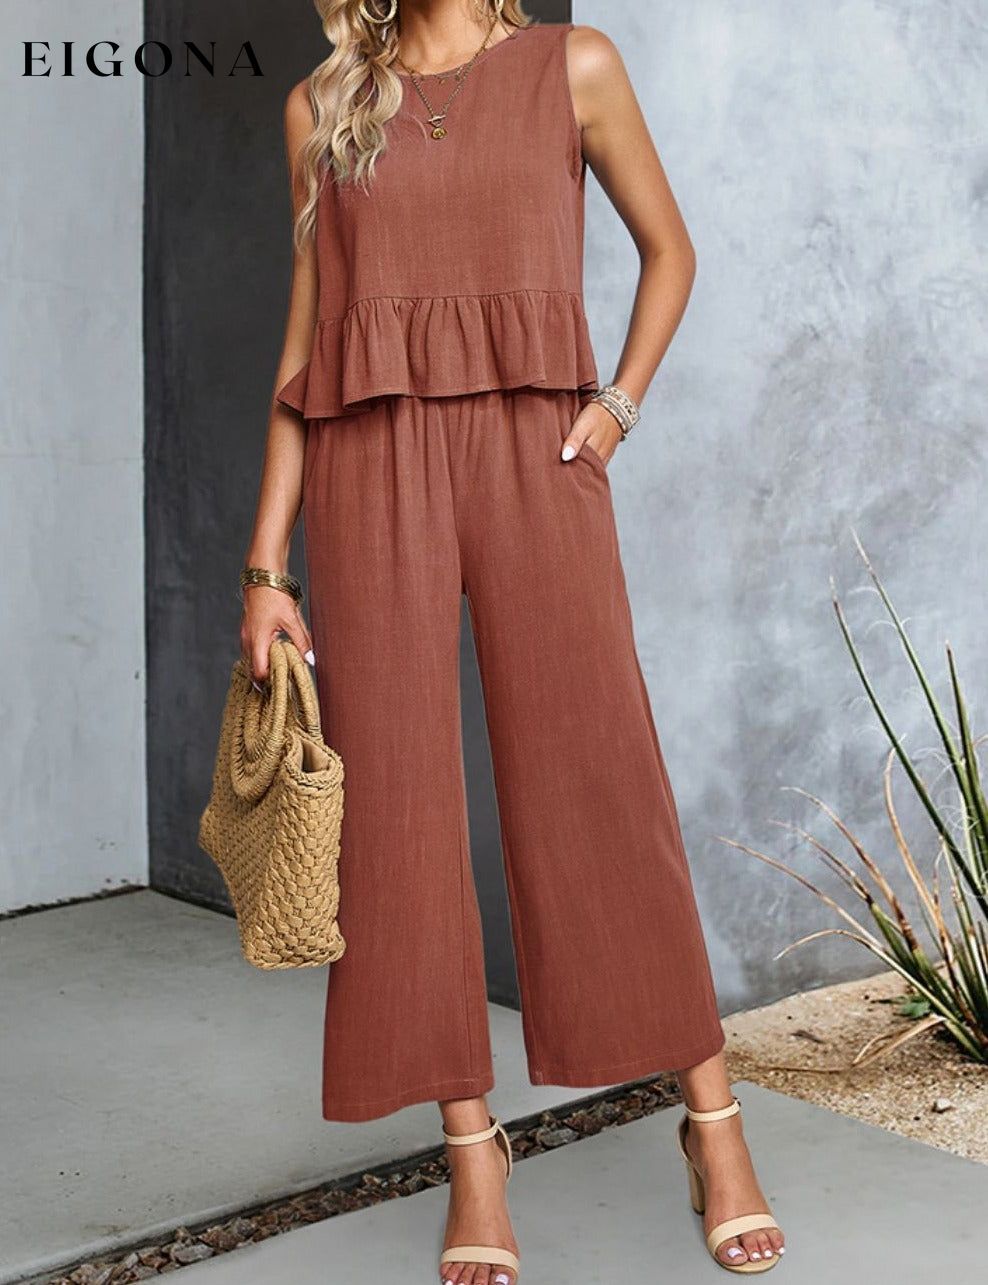 Decorative Button Ruffle Hem Tank and Pants Set Terracotta clothes DY sets Ship From Overseas trend